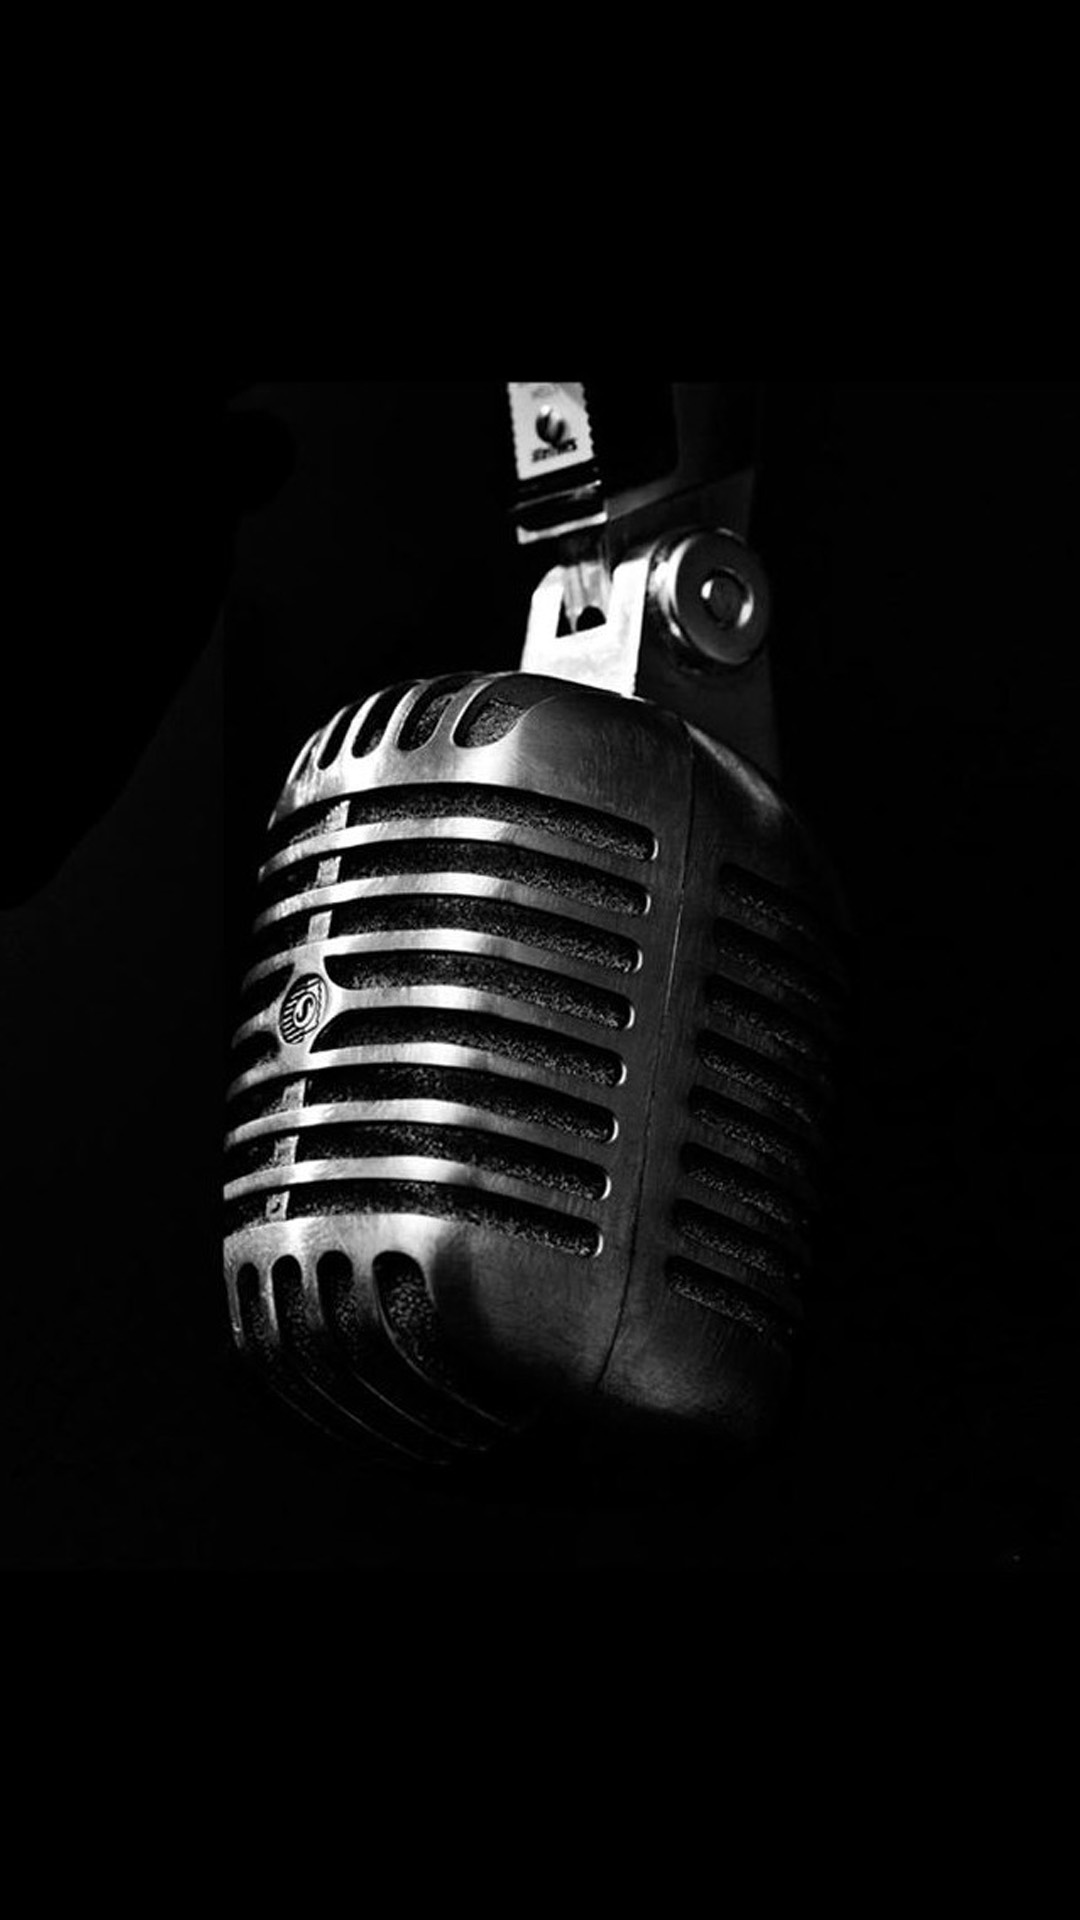 music iphone wallpaper,microphone,audio equipment,auto part,technology,still life photography